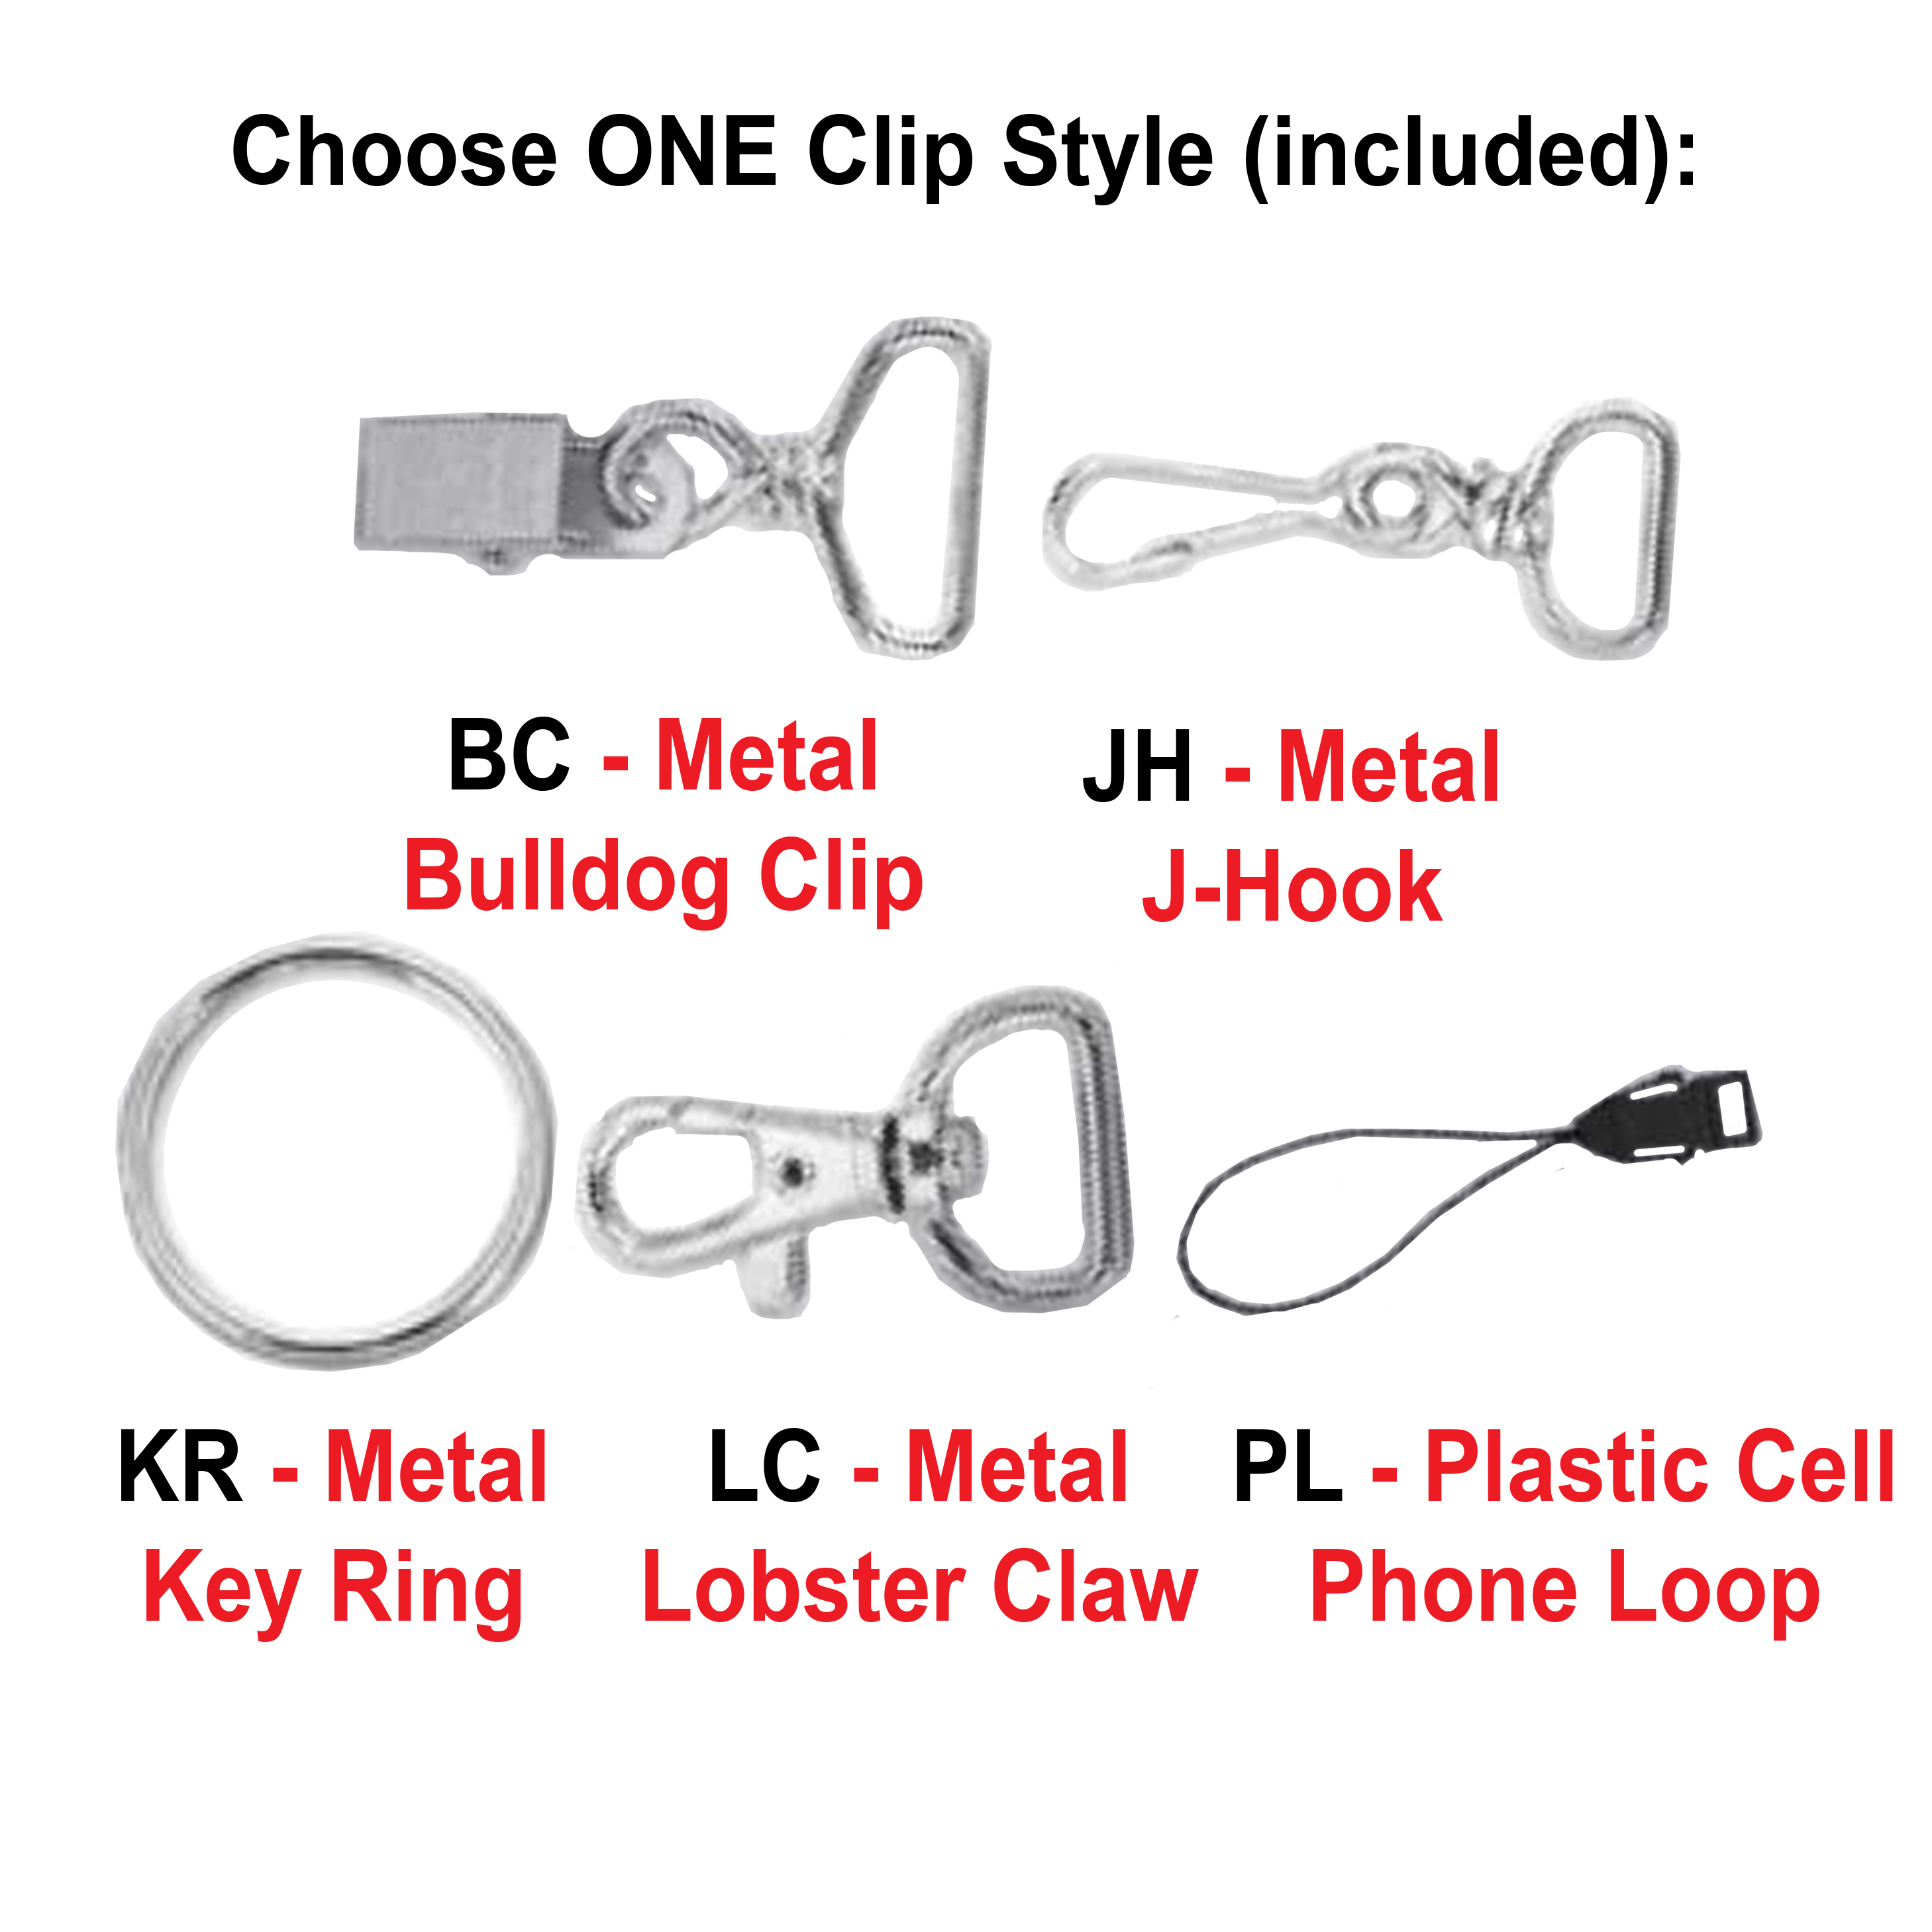 Custom Lanyards for Holding Keys or ID badges | Pro-Tuff Decals